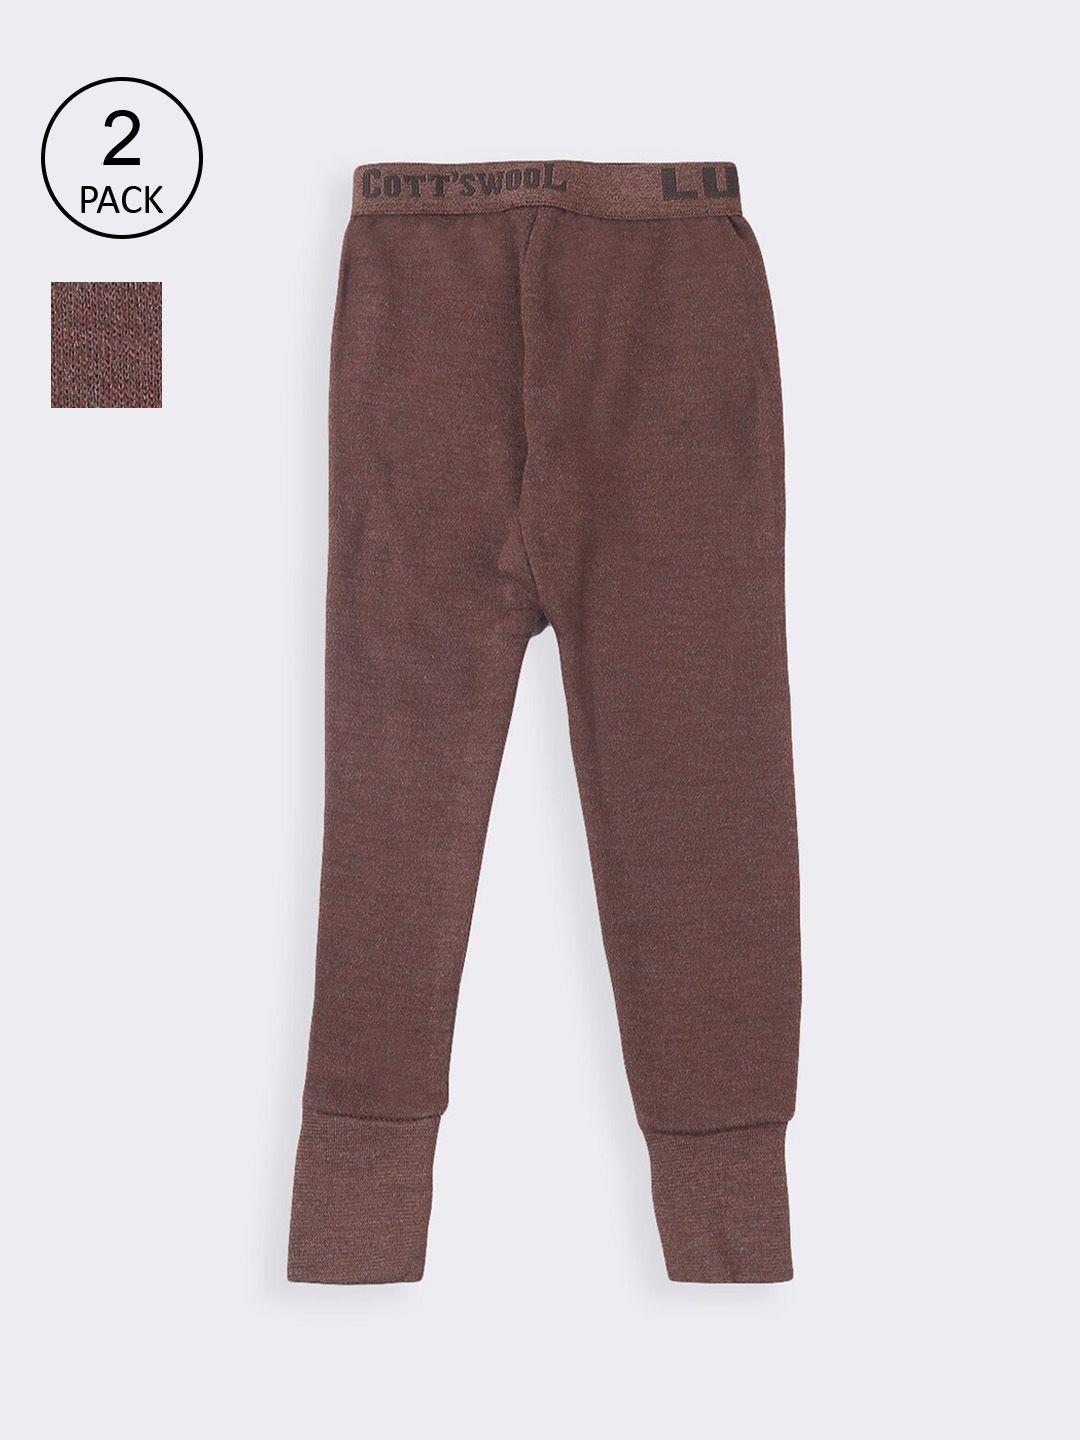 lux-cottswool-boys-pack-of-2-brown-solid-cotton-thermal-bottoms